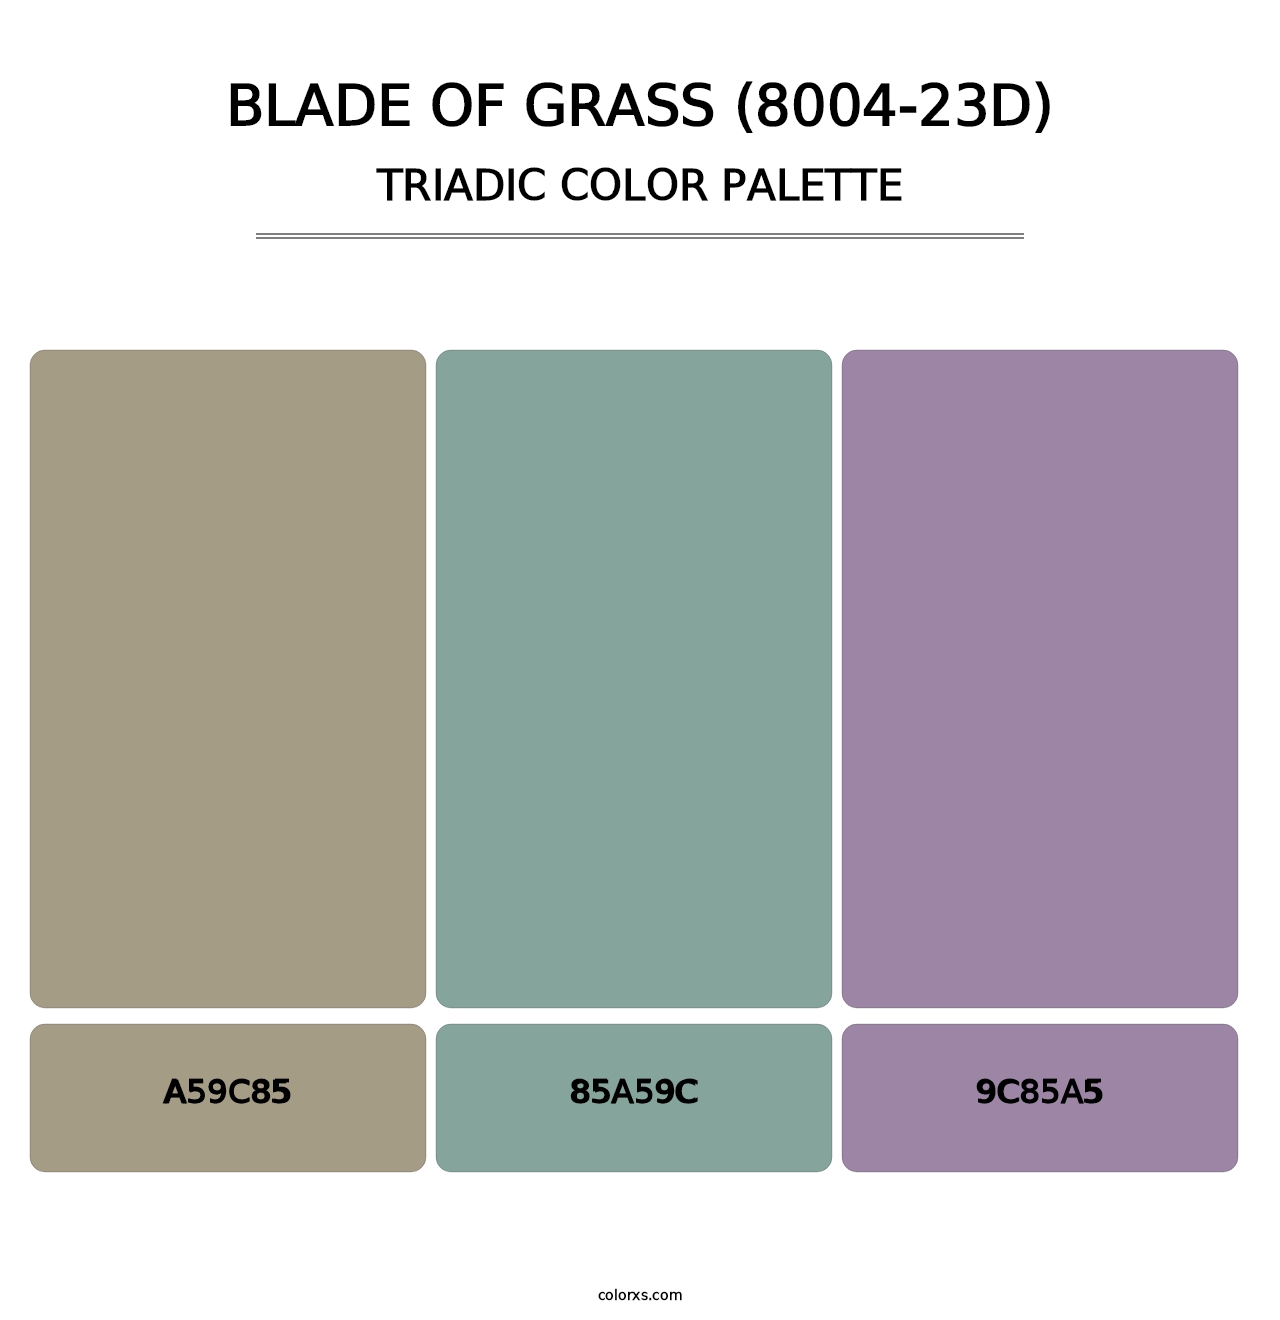 Blade of Grass (8004-23D) - Triadic Color Palette